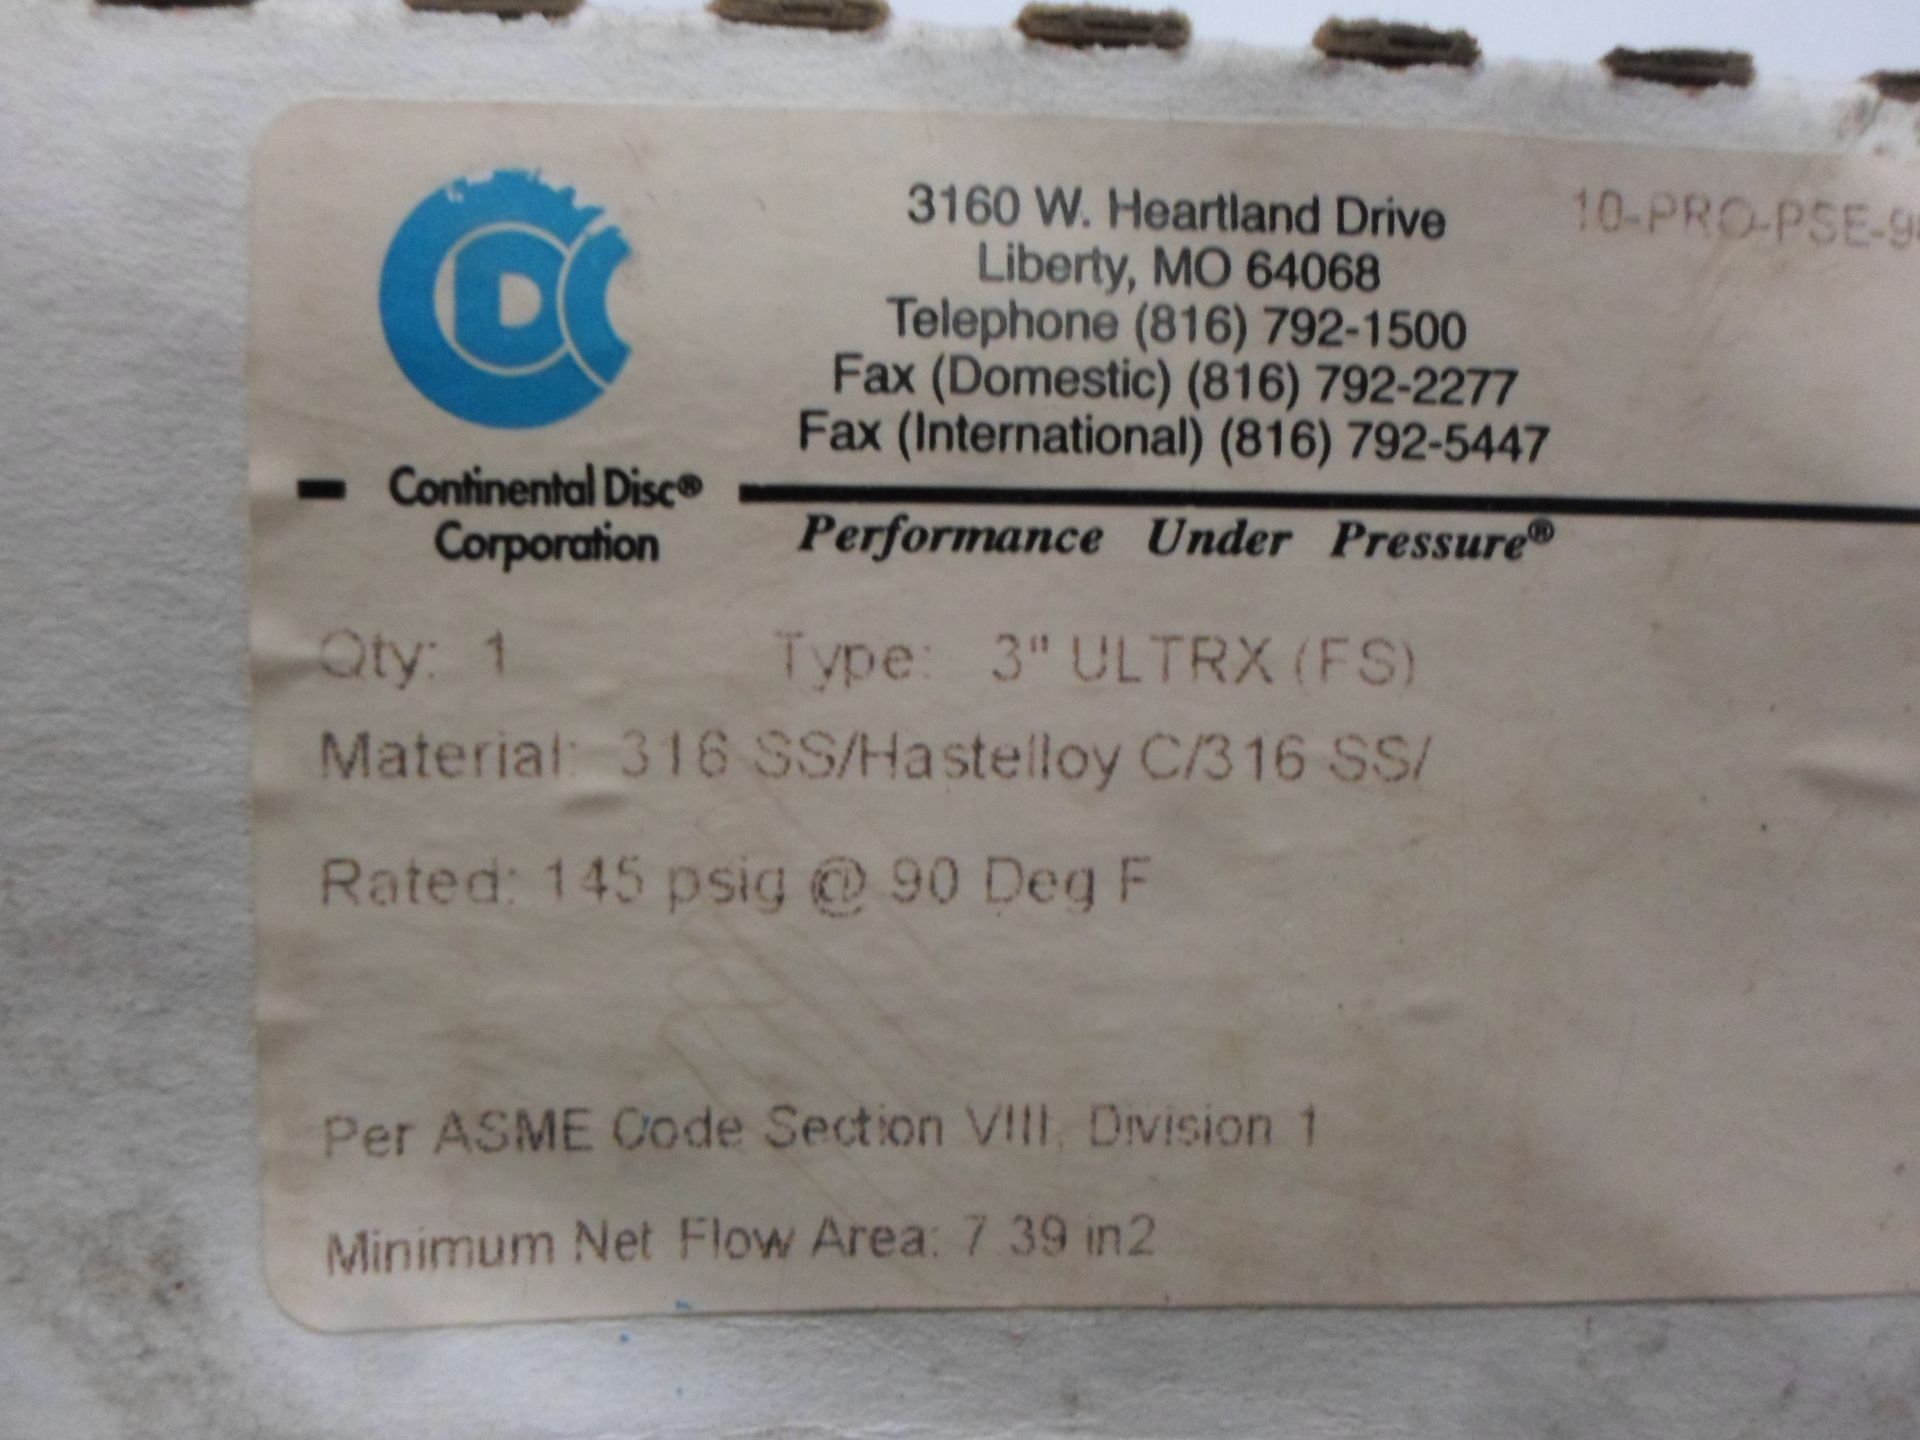 Continental Disc Corporation 3" ULTREX FS 10-PRO-PSE-9039B - Image 3 of 3